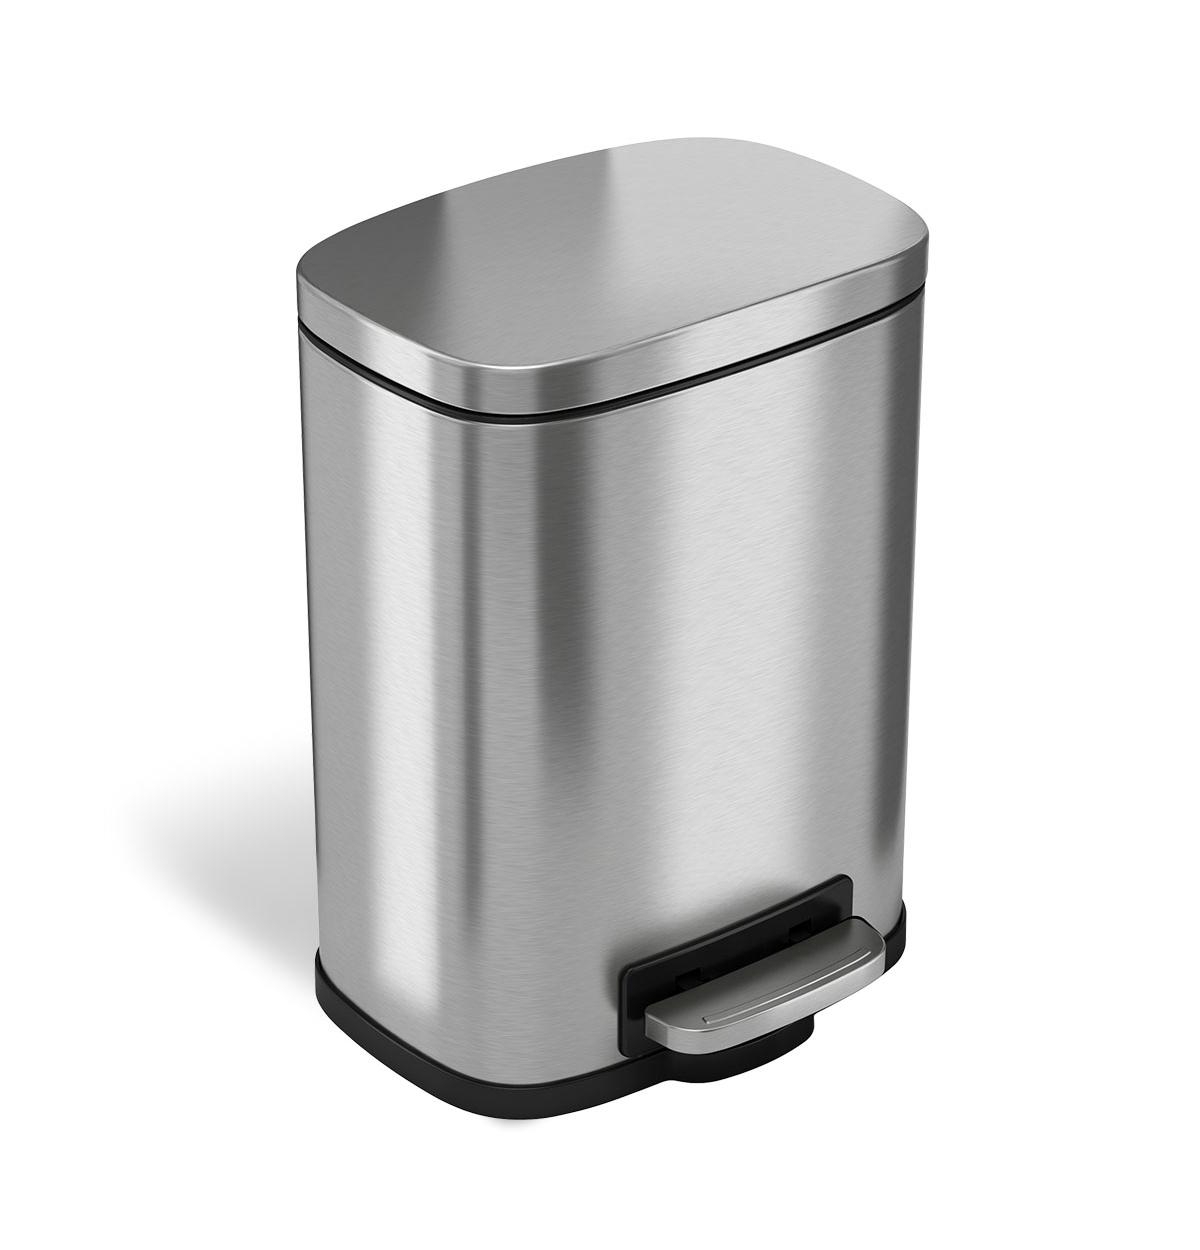 5 L / 1.32 Gal Premium Stainless Steel Step Trash Can - Silver